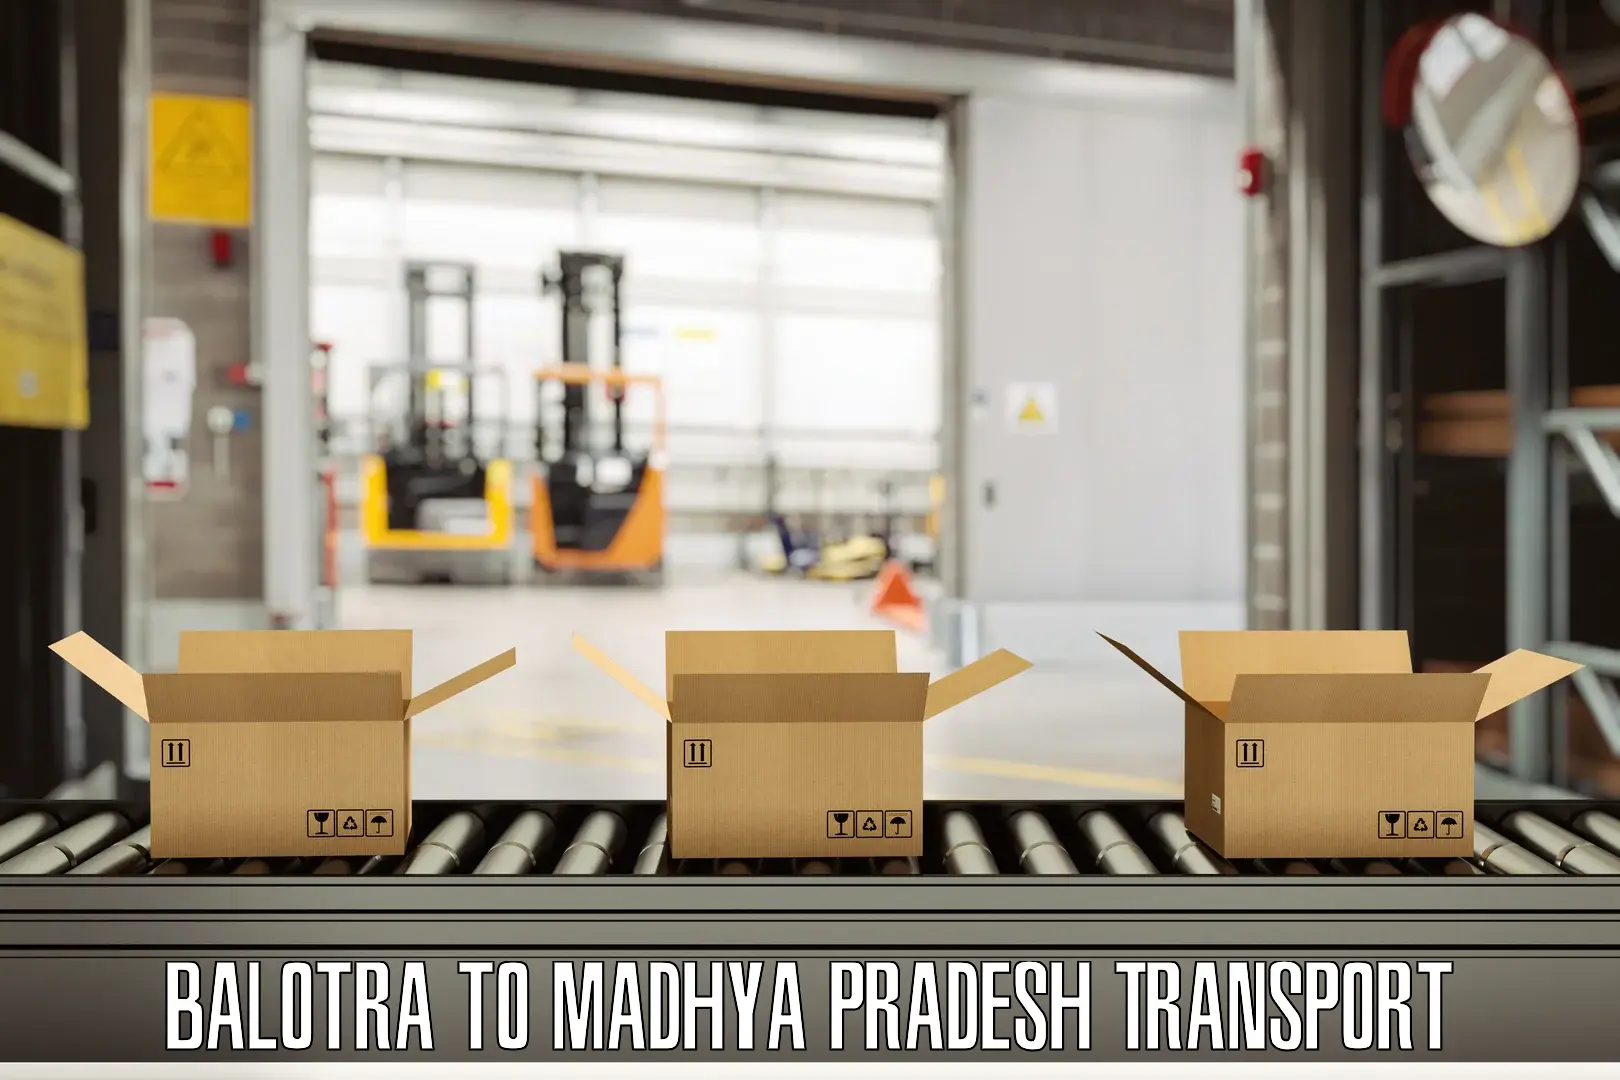 Truck transport companies in India Balotra to Indore